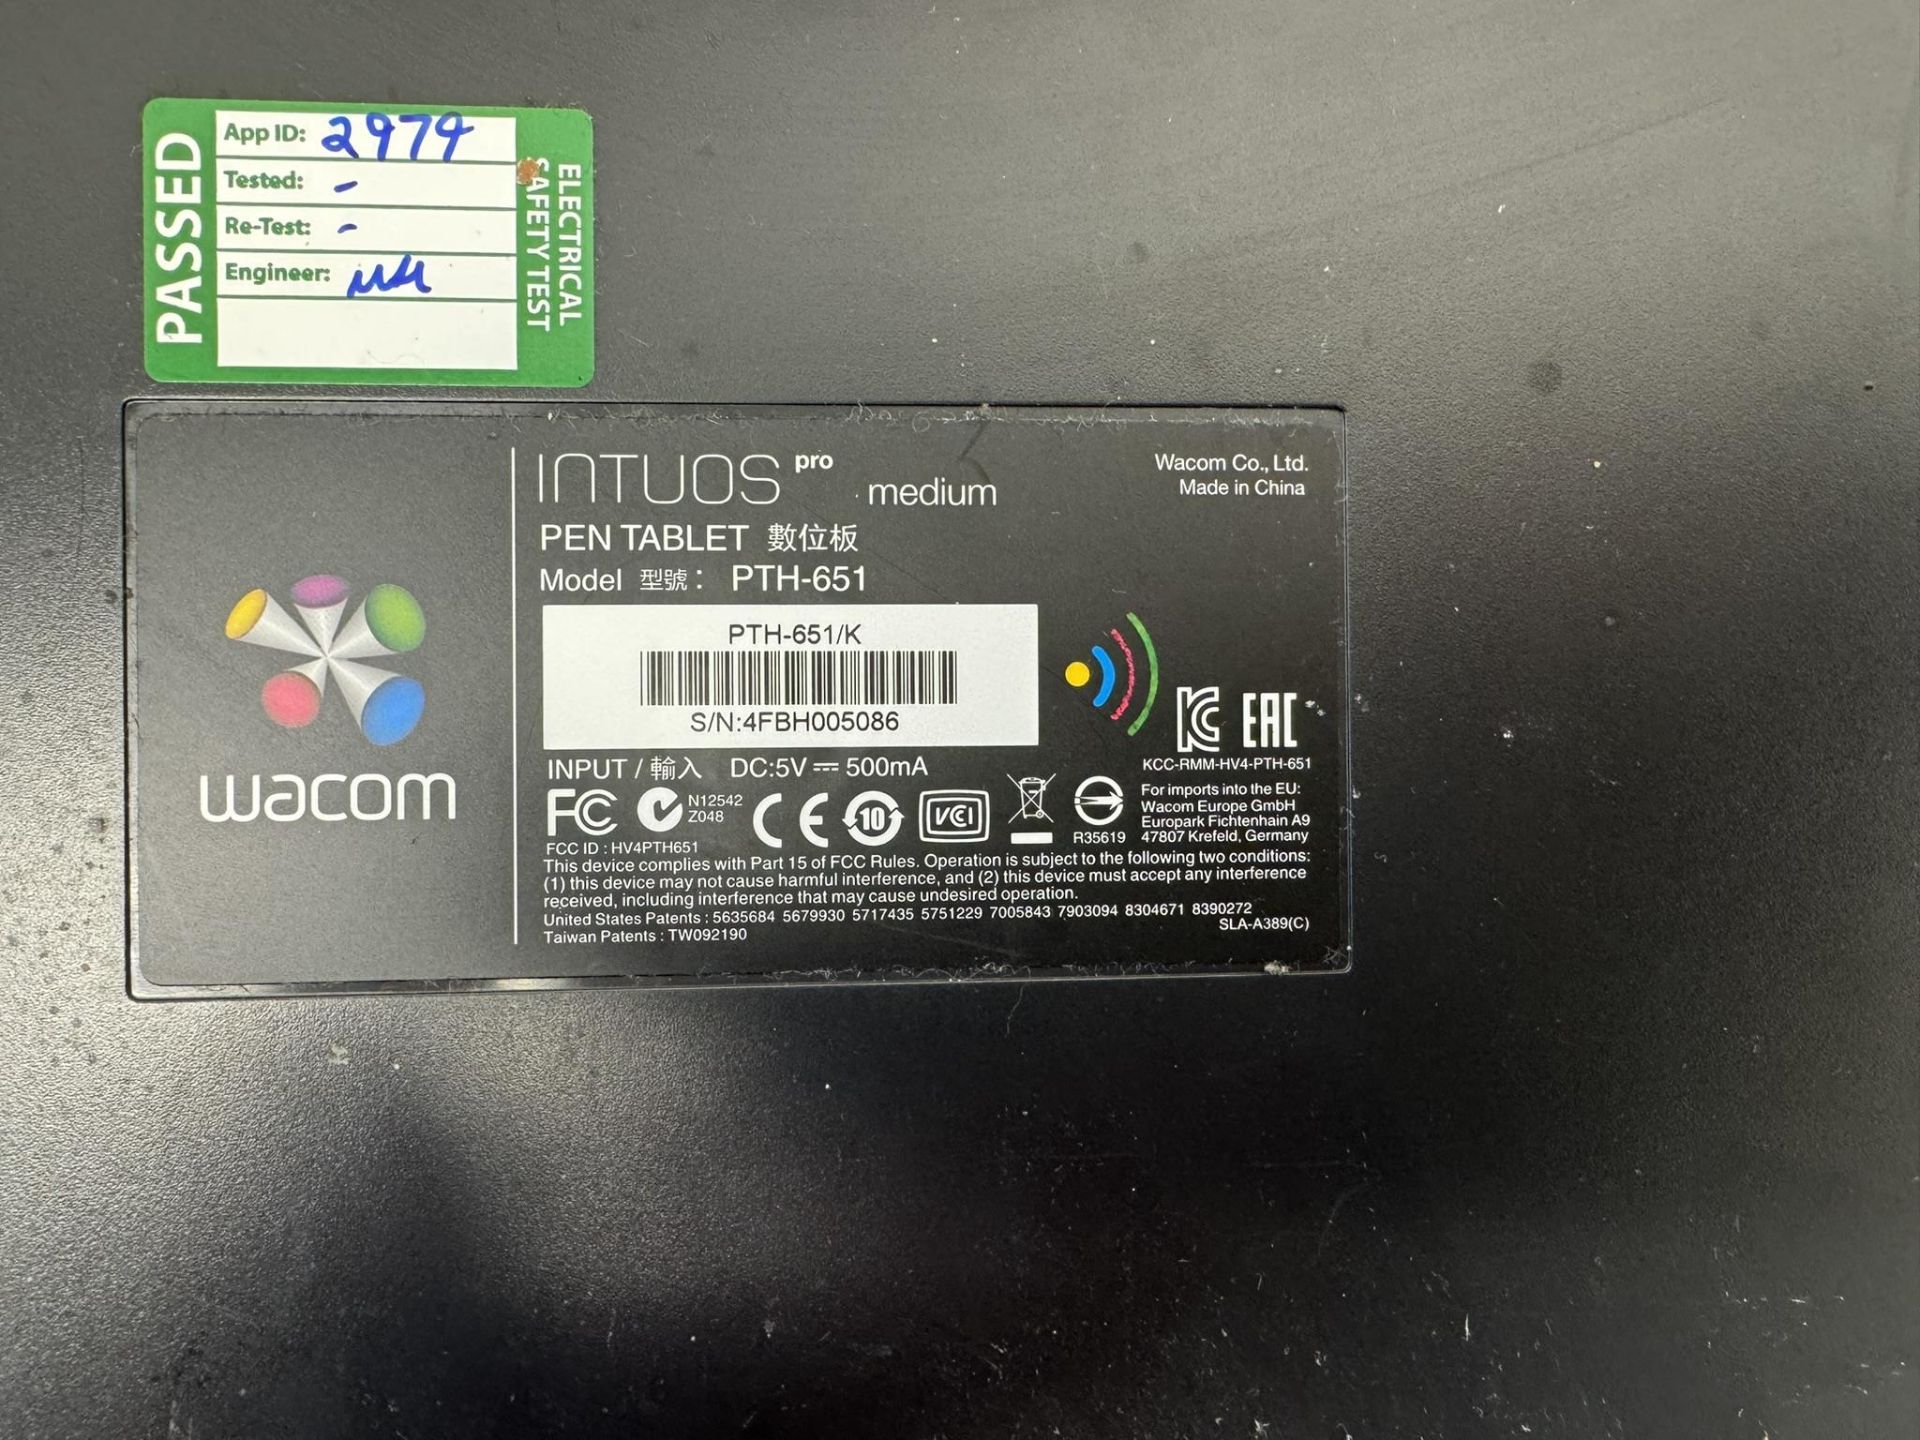 Wacom Intuos Pro Medium Pth651 Pen and Touch Tablet - Image 3 of 4